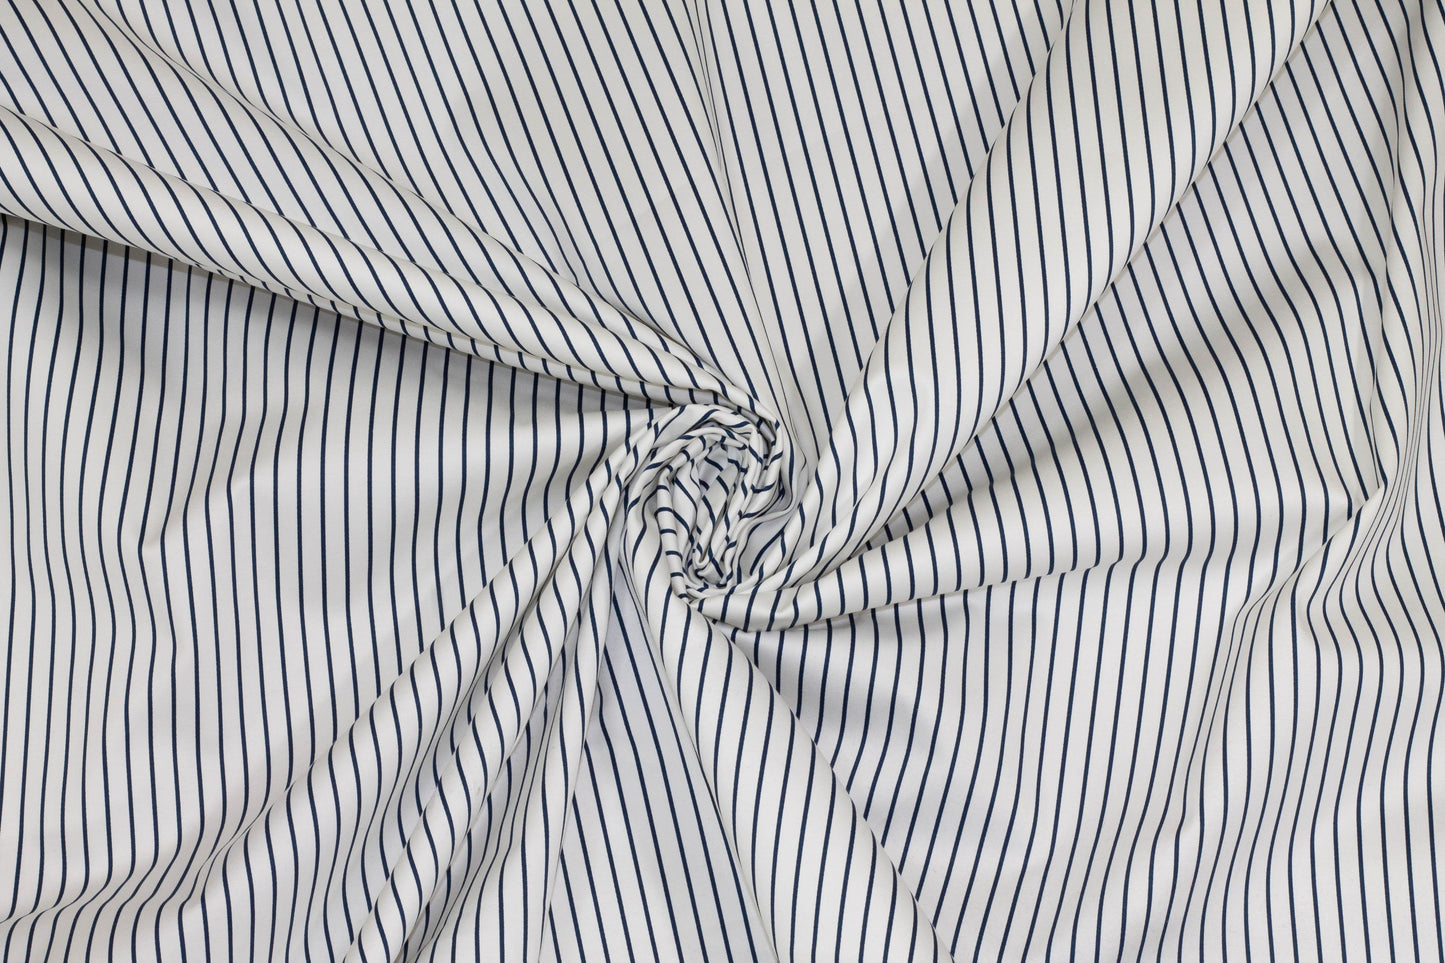 Navy Blue and White Striped Stretch Cotton Sateen - Prime Fabrics